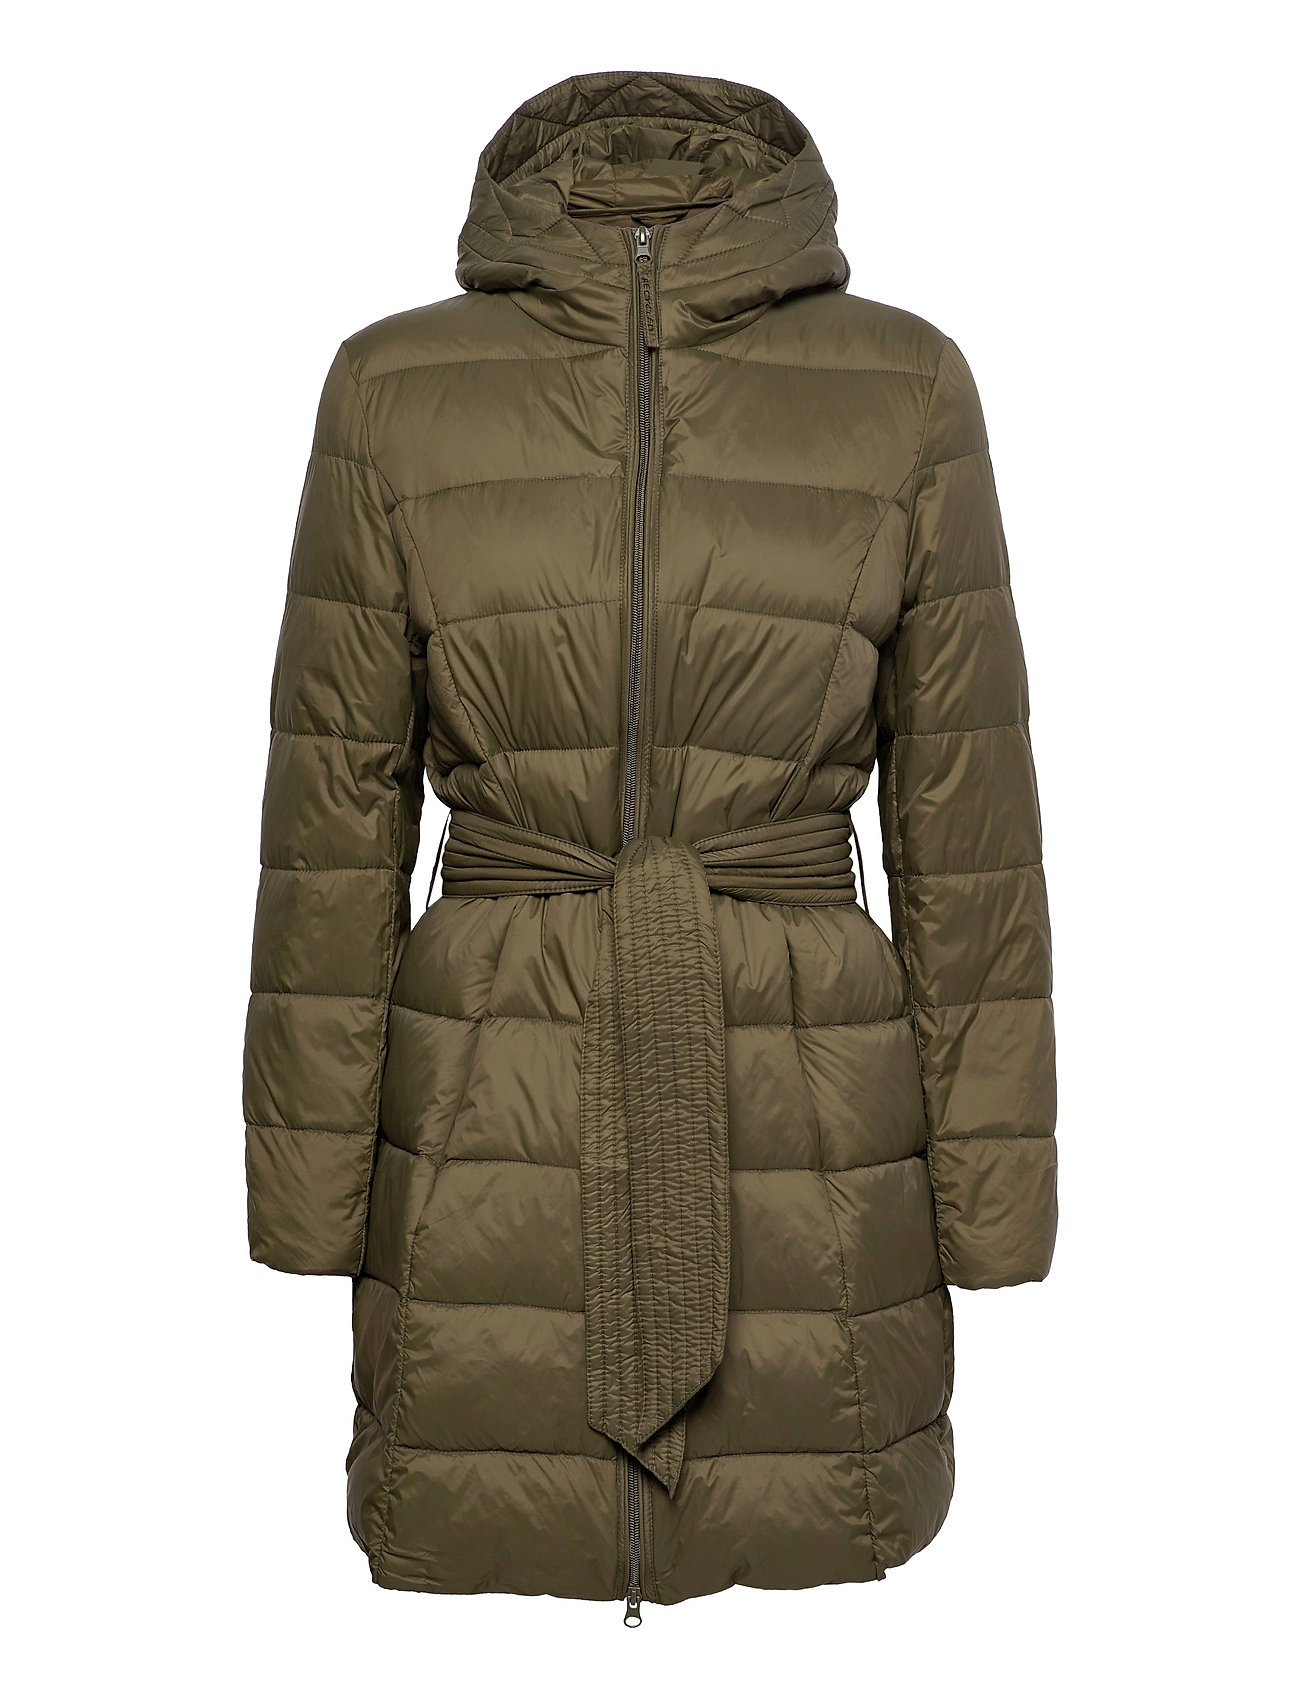 FREE/QUENT Fqtops-l-ja-as-sus - 129.95 €. Buy Padded Coats from FREE ...